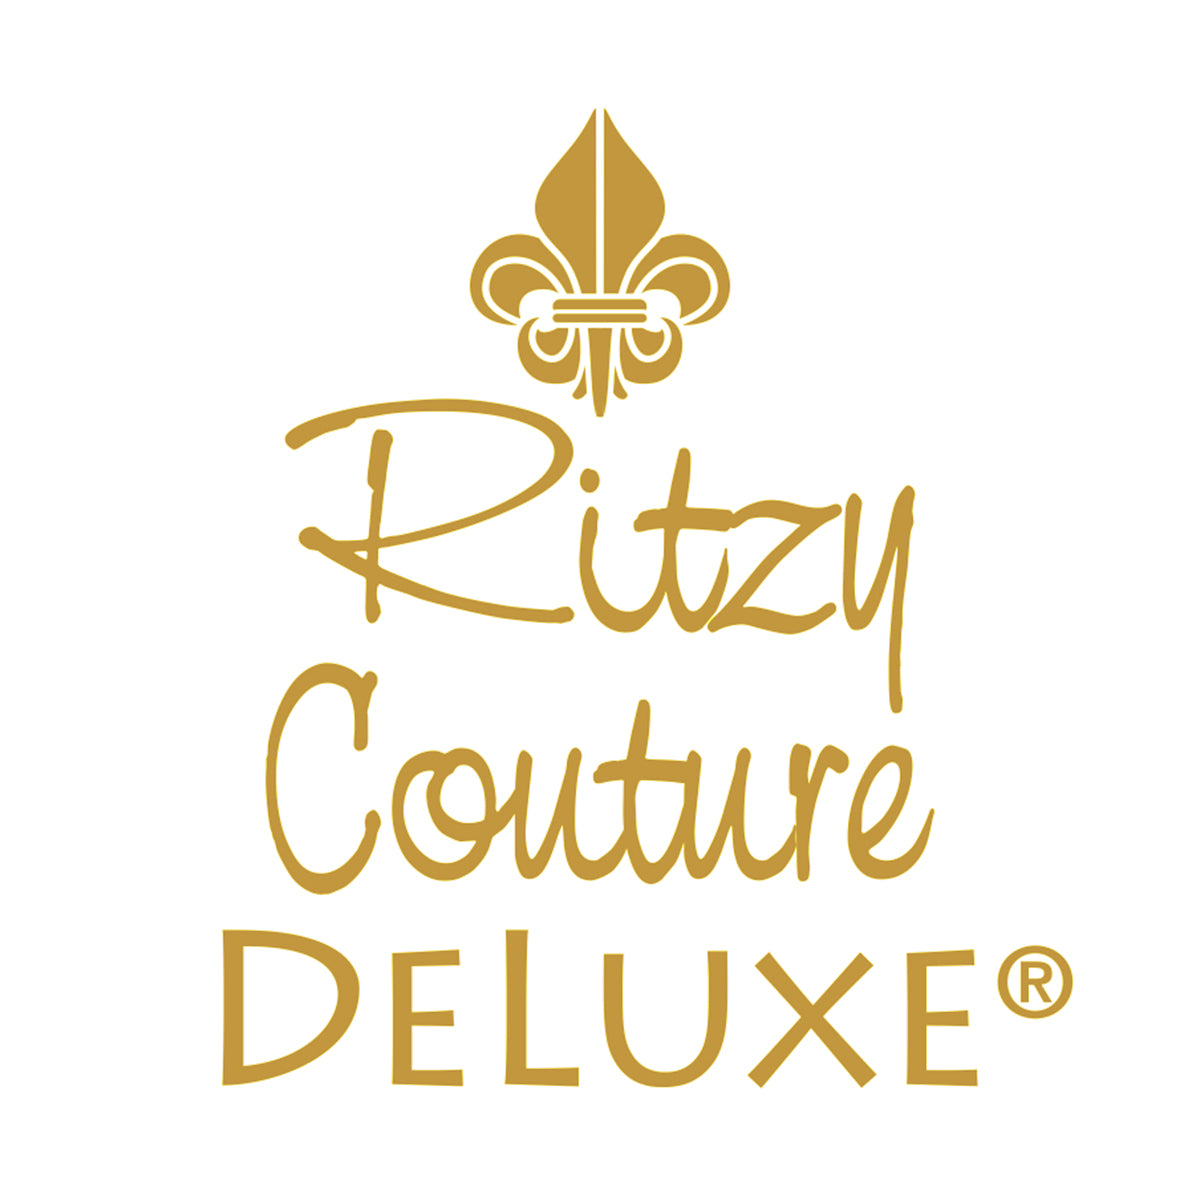 Christmas Gift Charm Bracelet by Ritzy Couture DeLuxe – 22k Gold Layered Brass